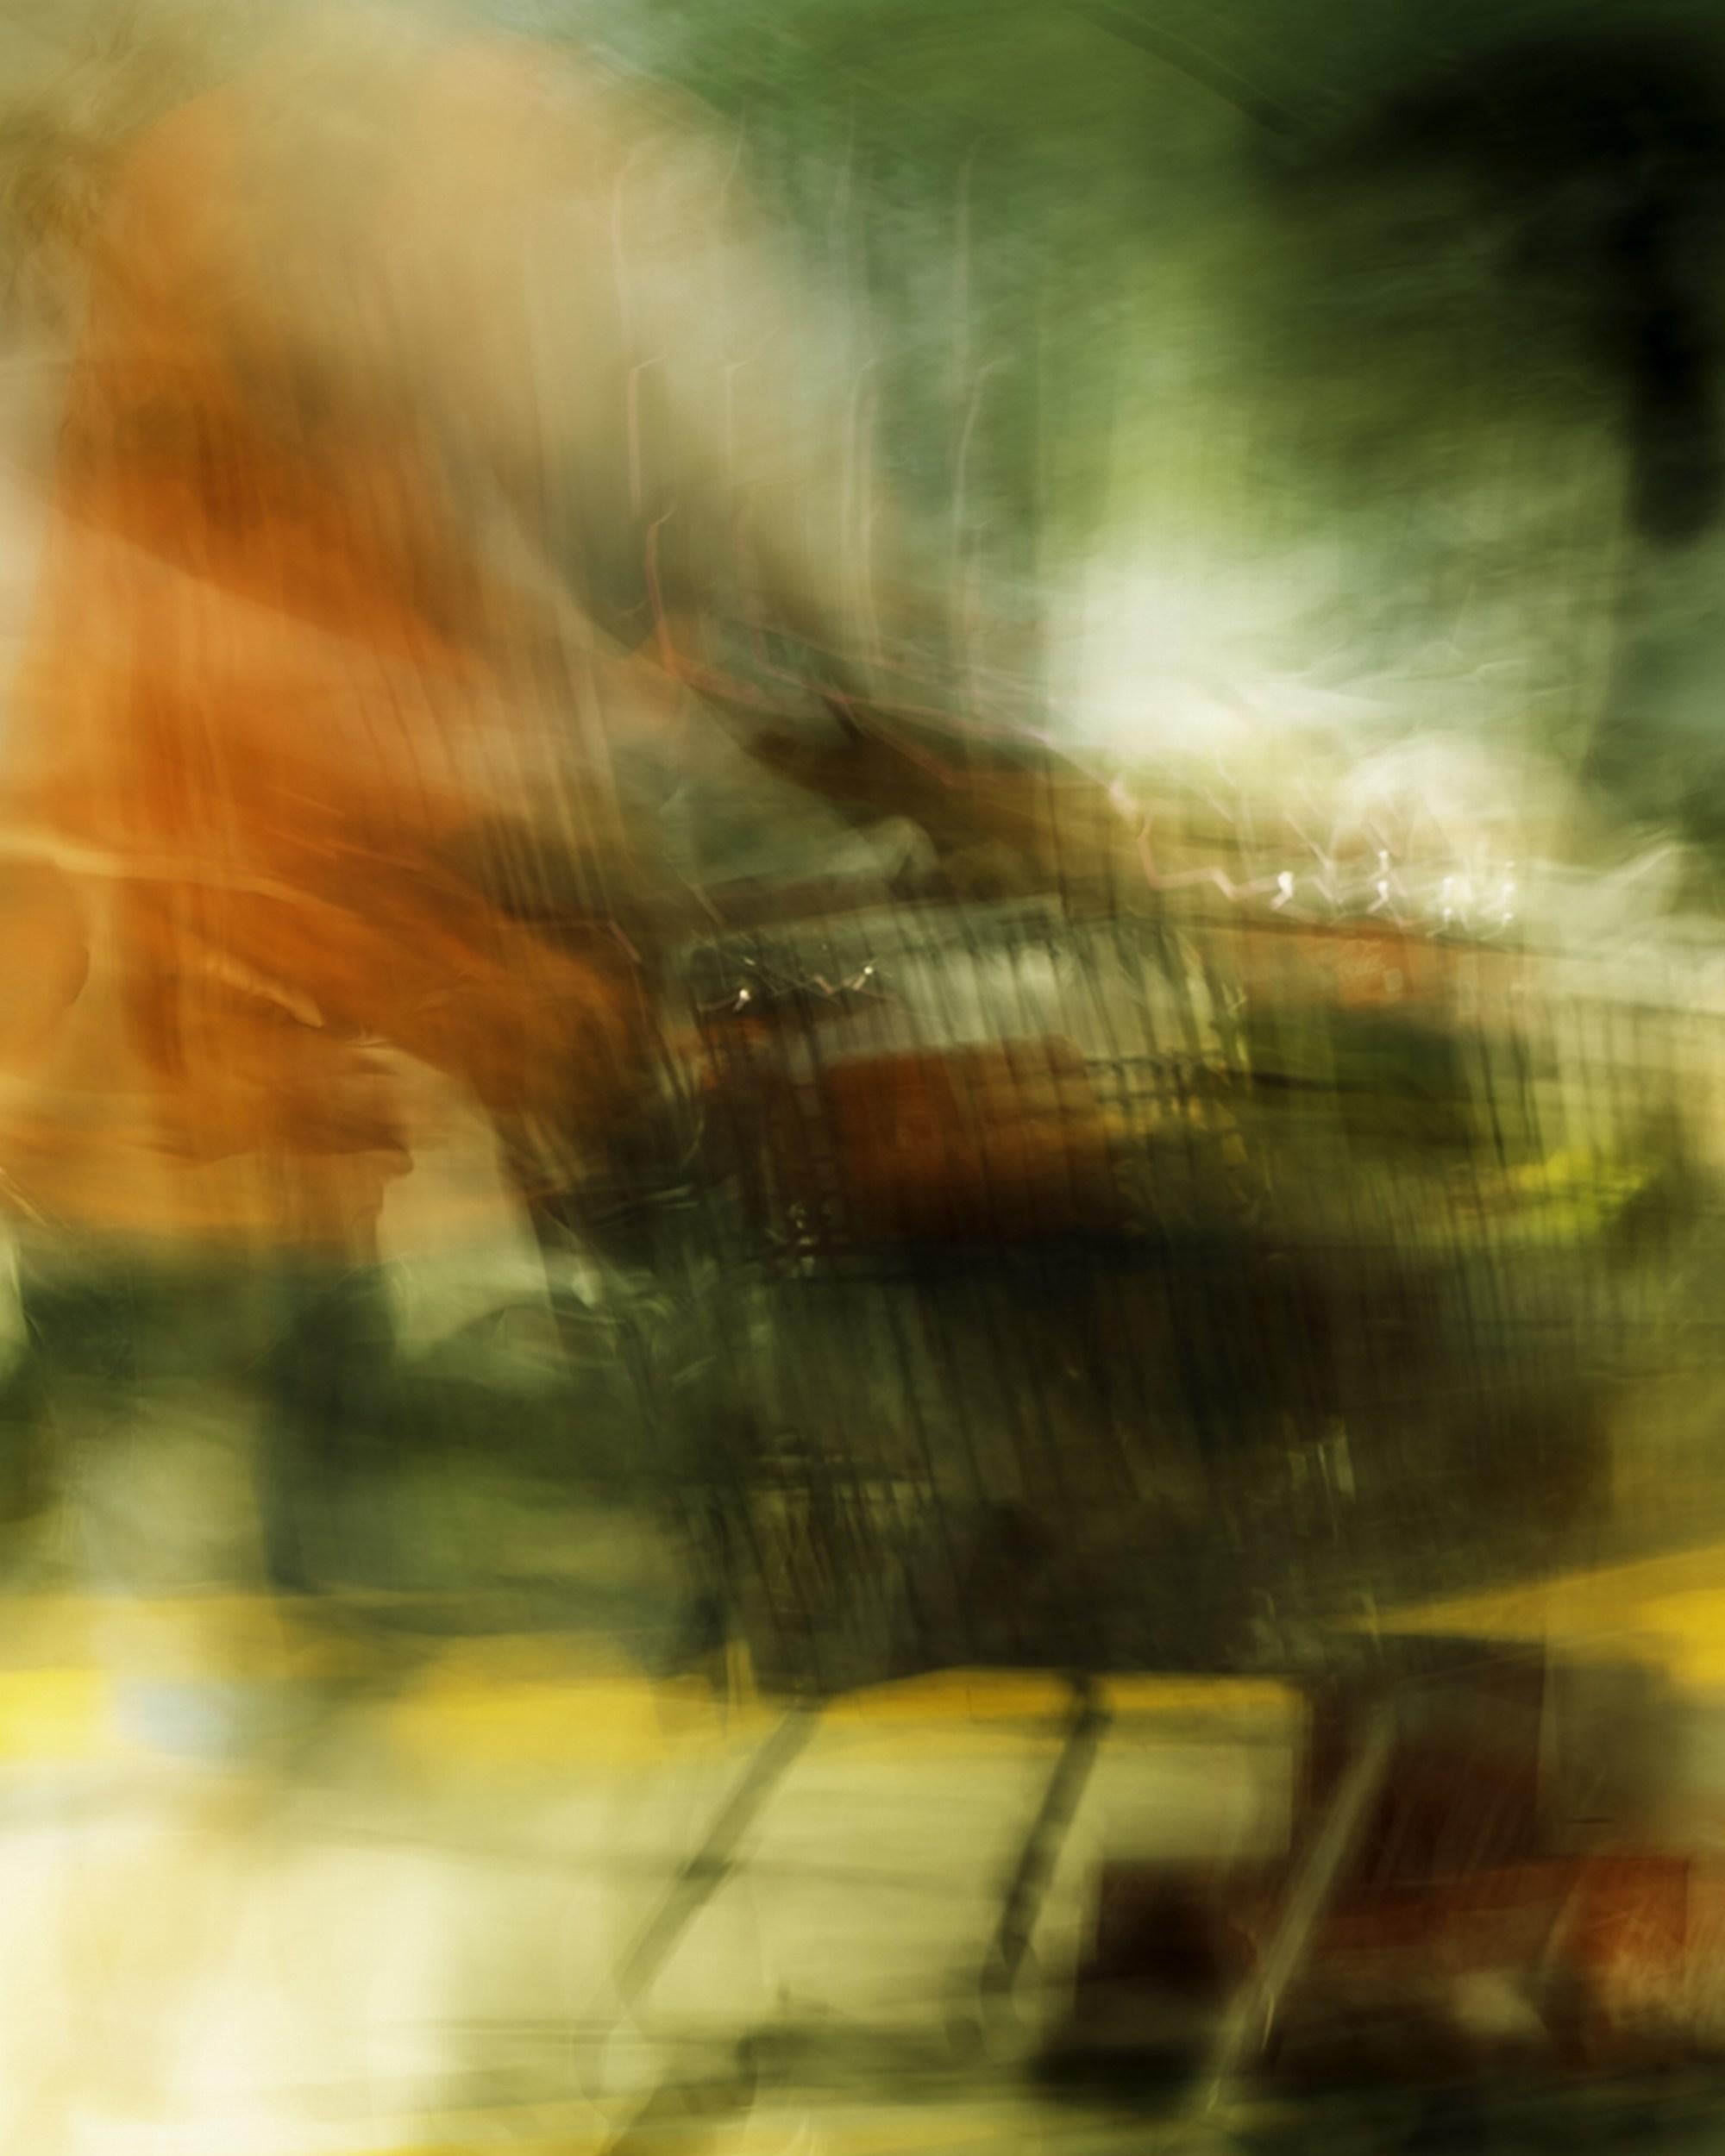 Hell on Wheels (colorful, abstract, everyday scene, bright colors, motion blur)